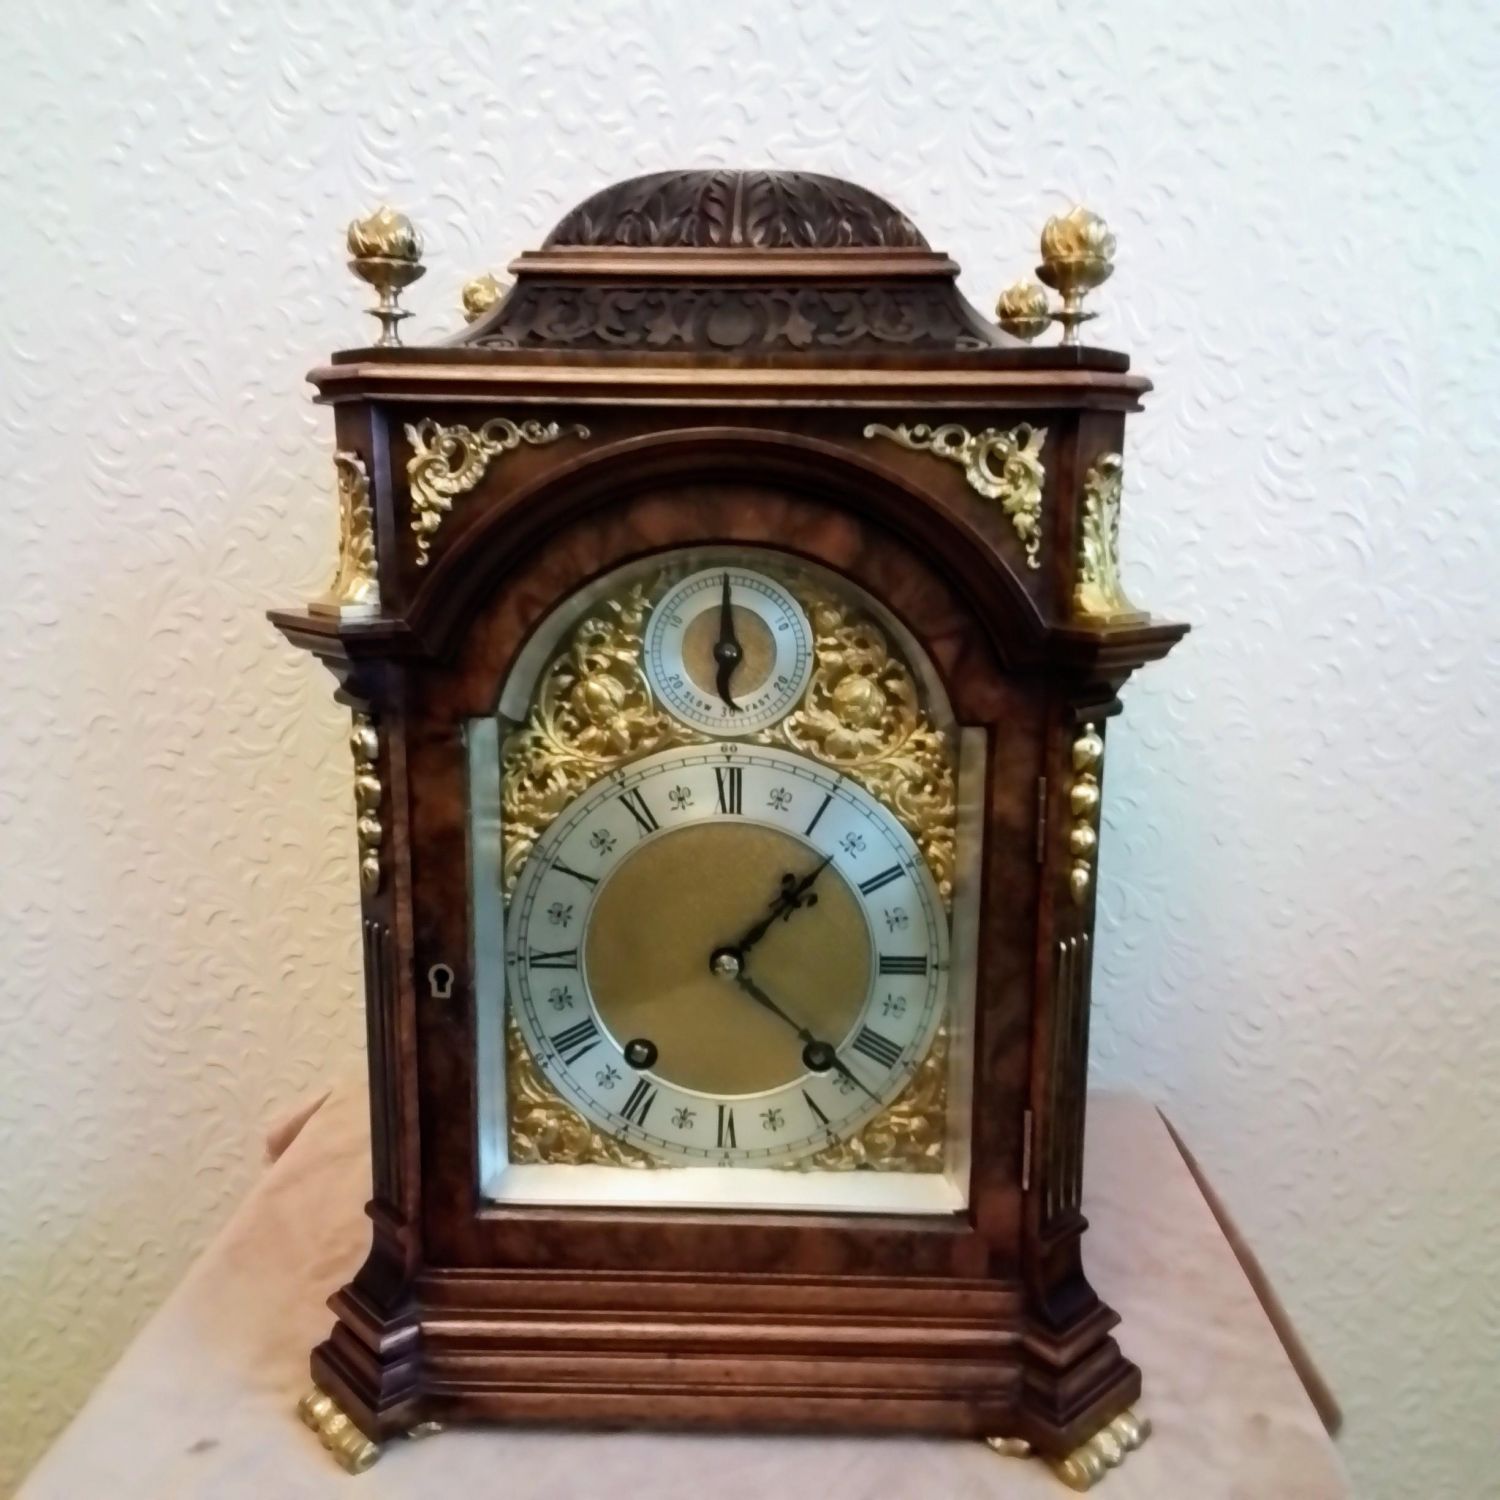 Walnut mantle clock by Lenzkirch with gilt mounts - Mantel Clocks -  Hemswell Antique Centres